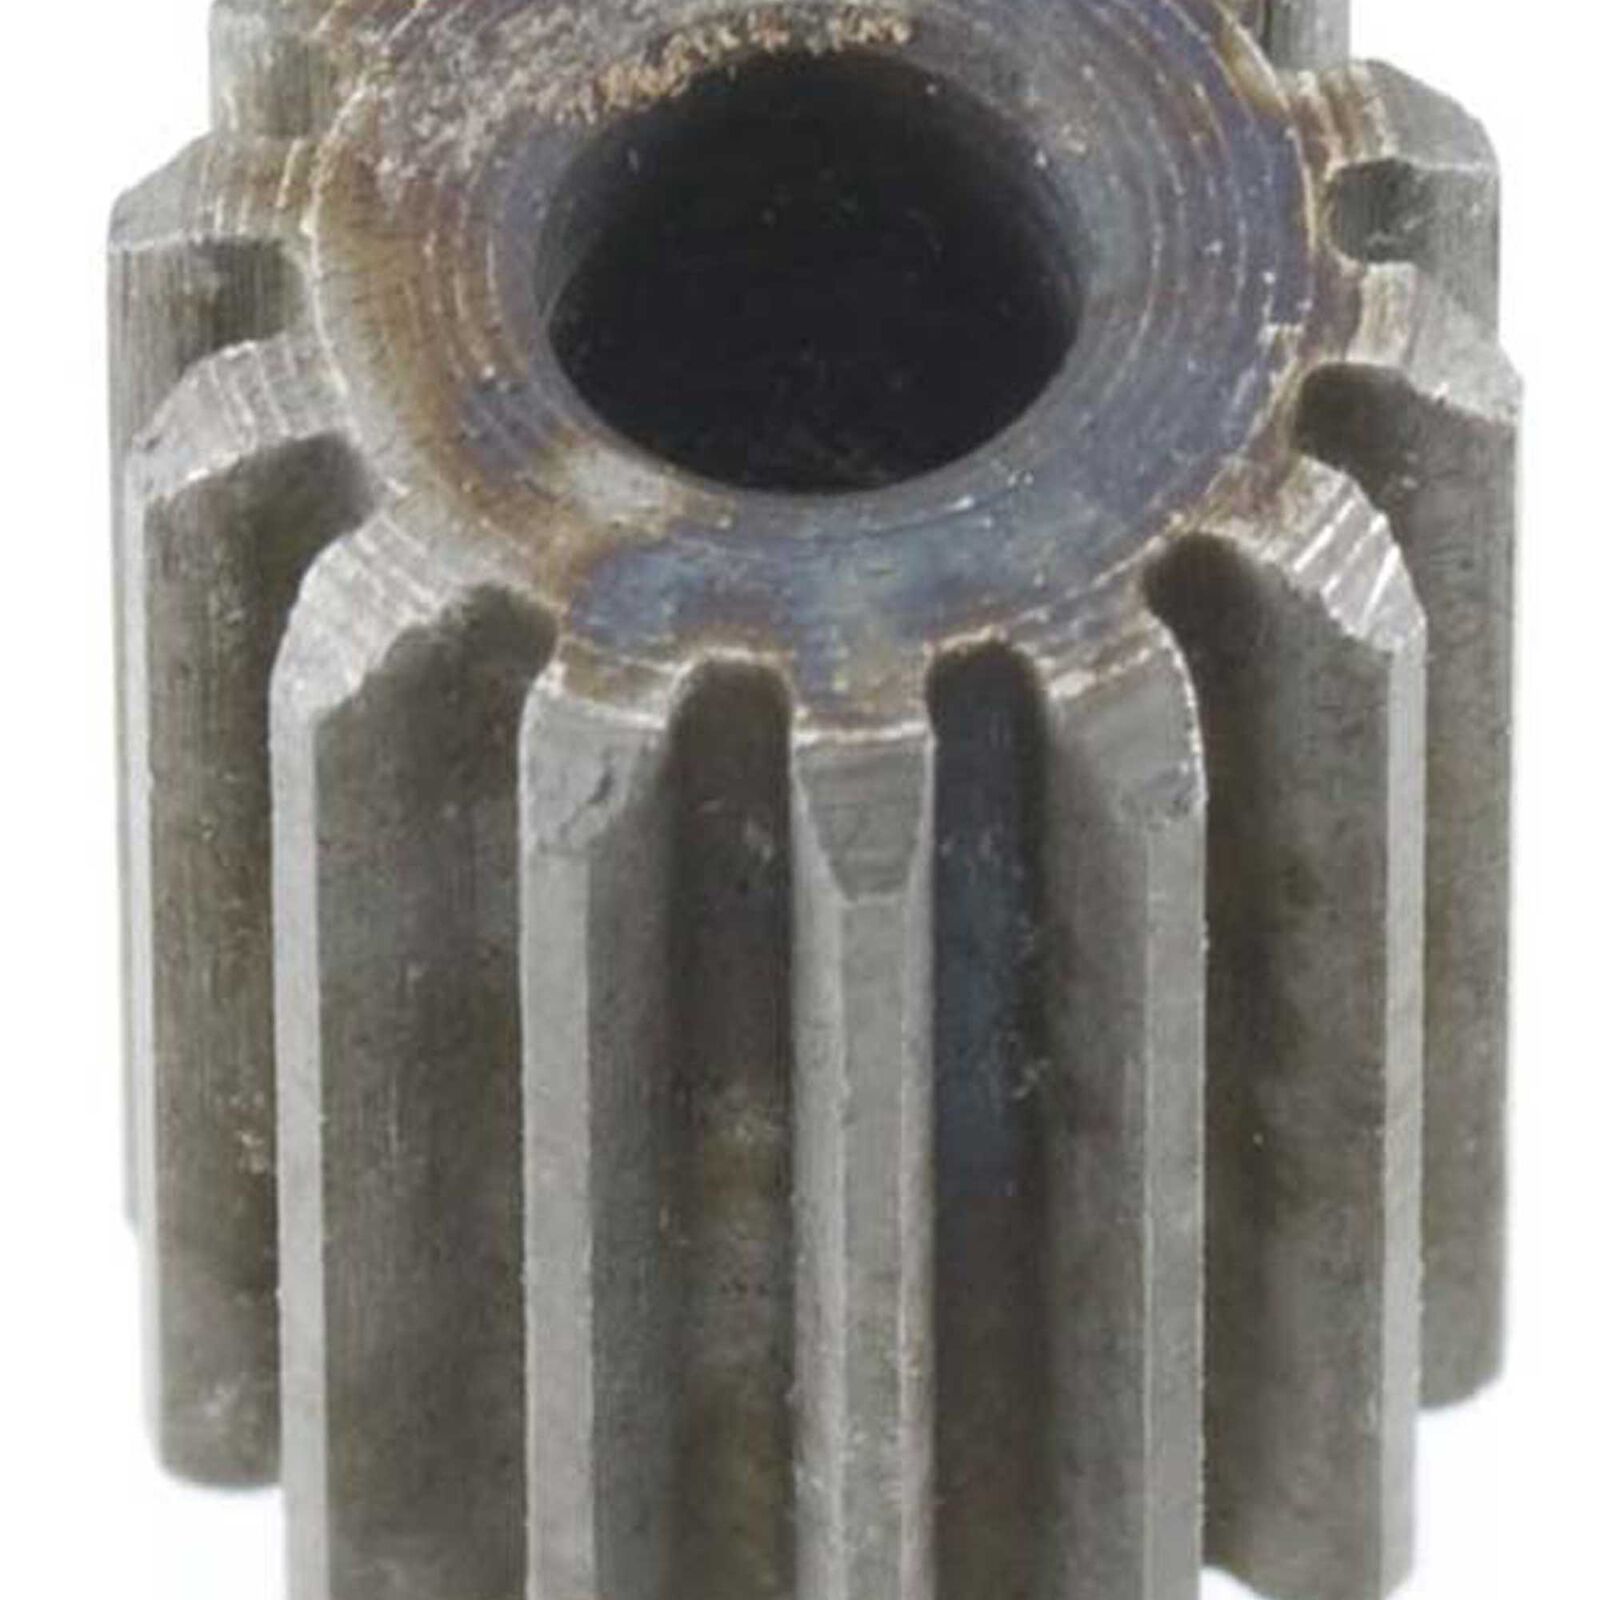 3mm Pinion Gear For Planetary Gearbox 24mm